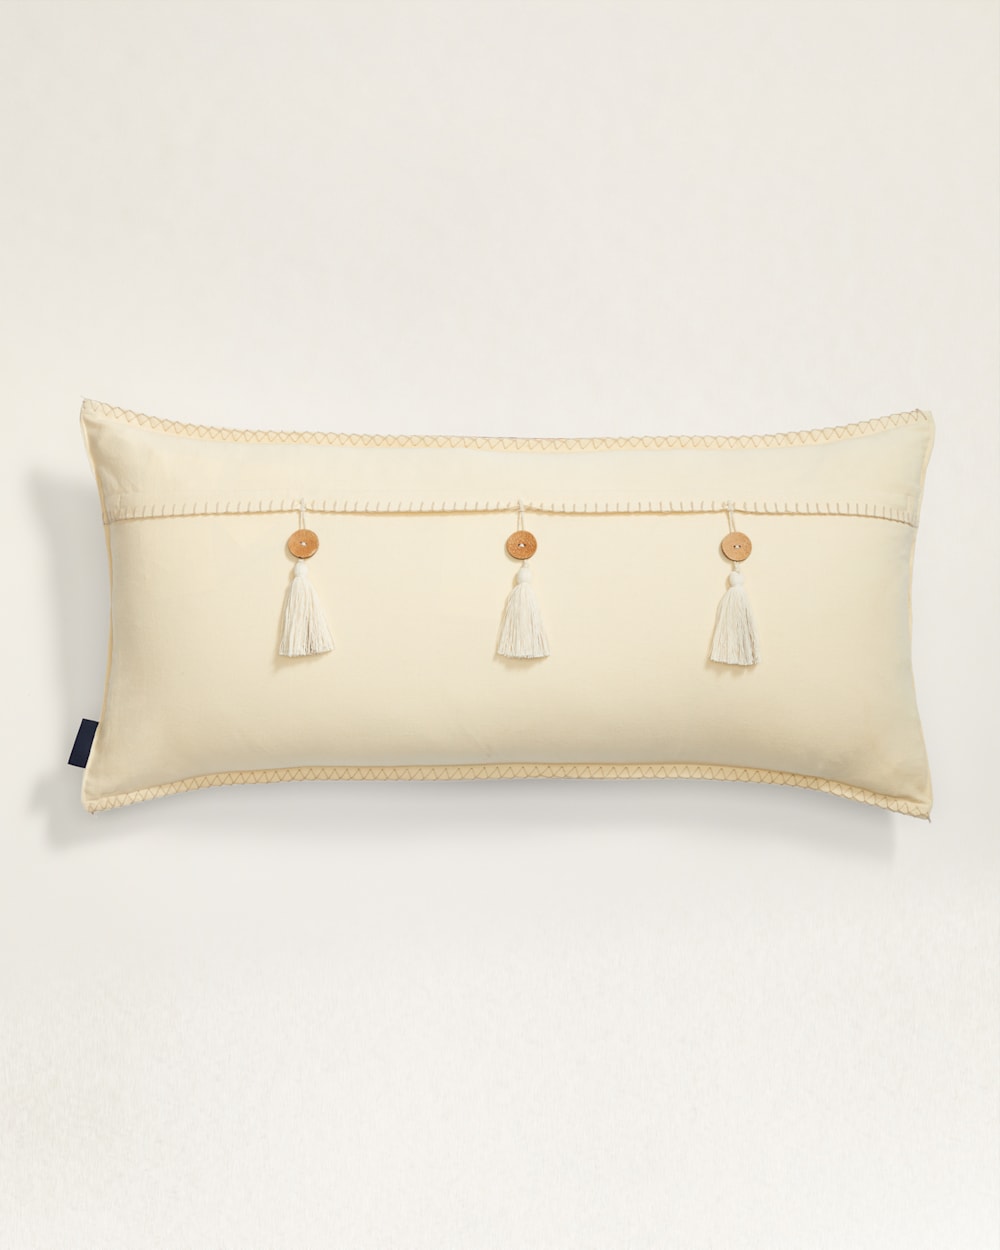 ALTERNATE VIEW OF HARDING EMBROIDERED HUG PILLOW IN IVORY image number 3